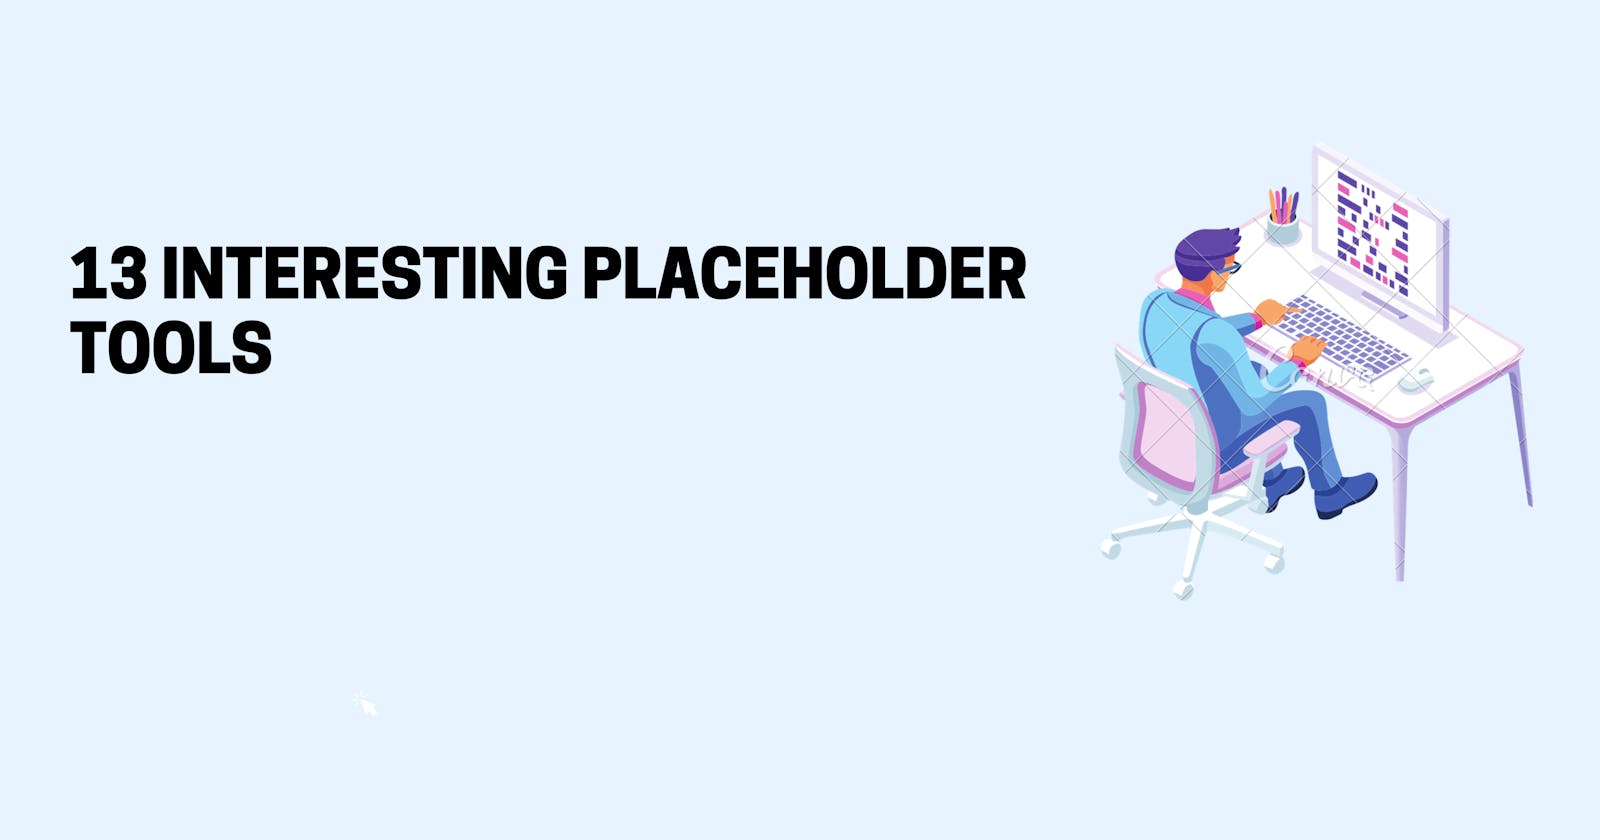 13 Interesting Placeholder tools